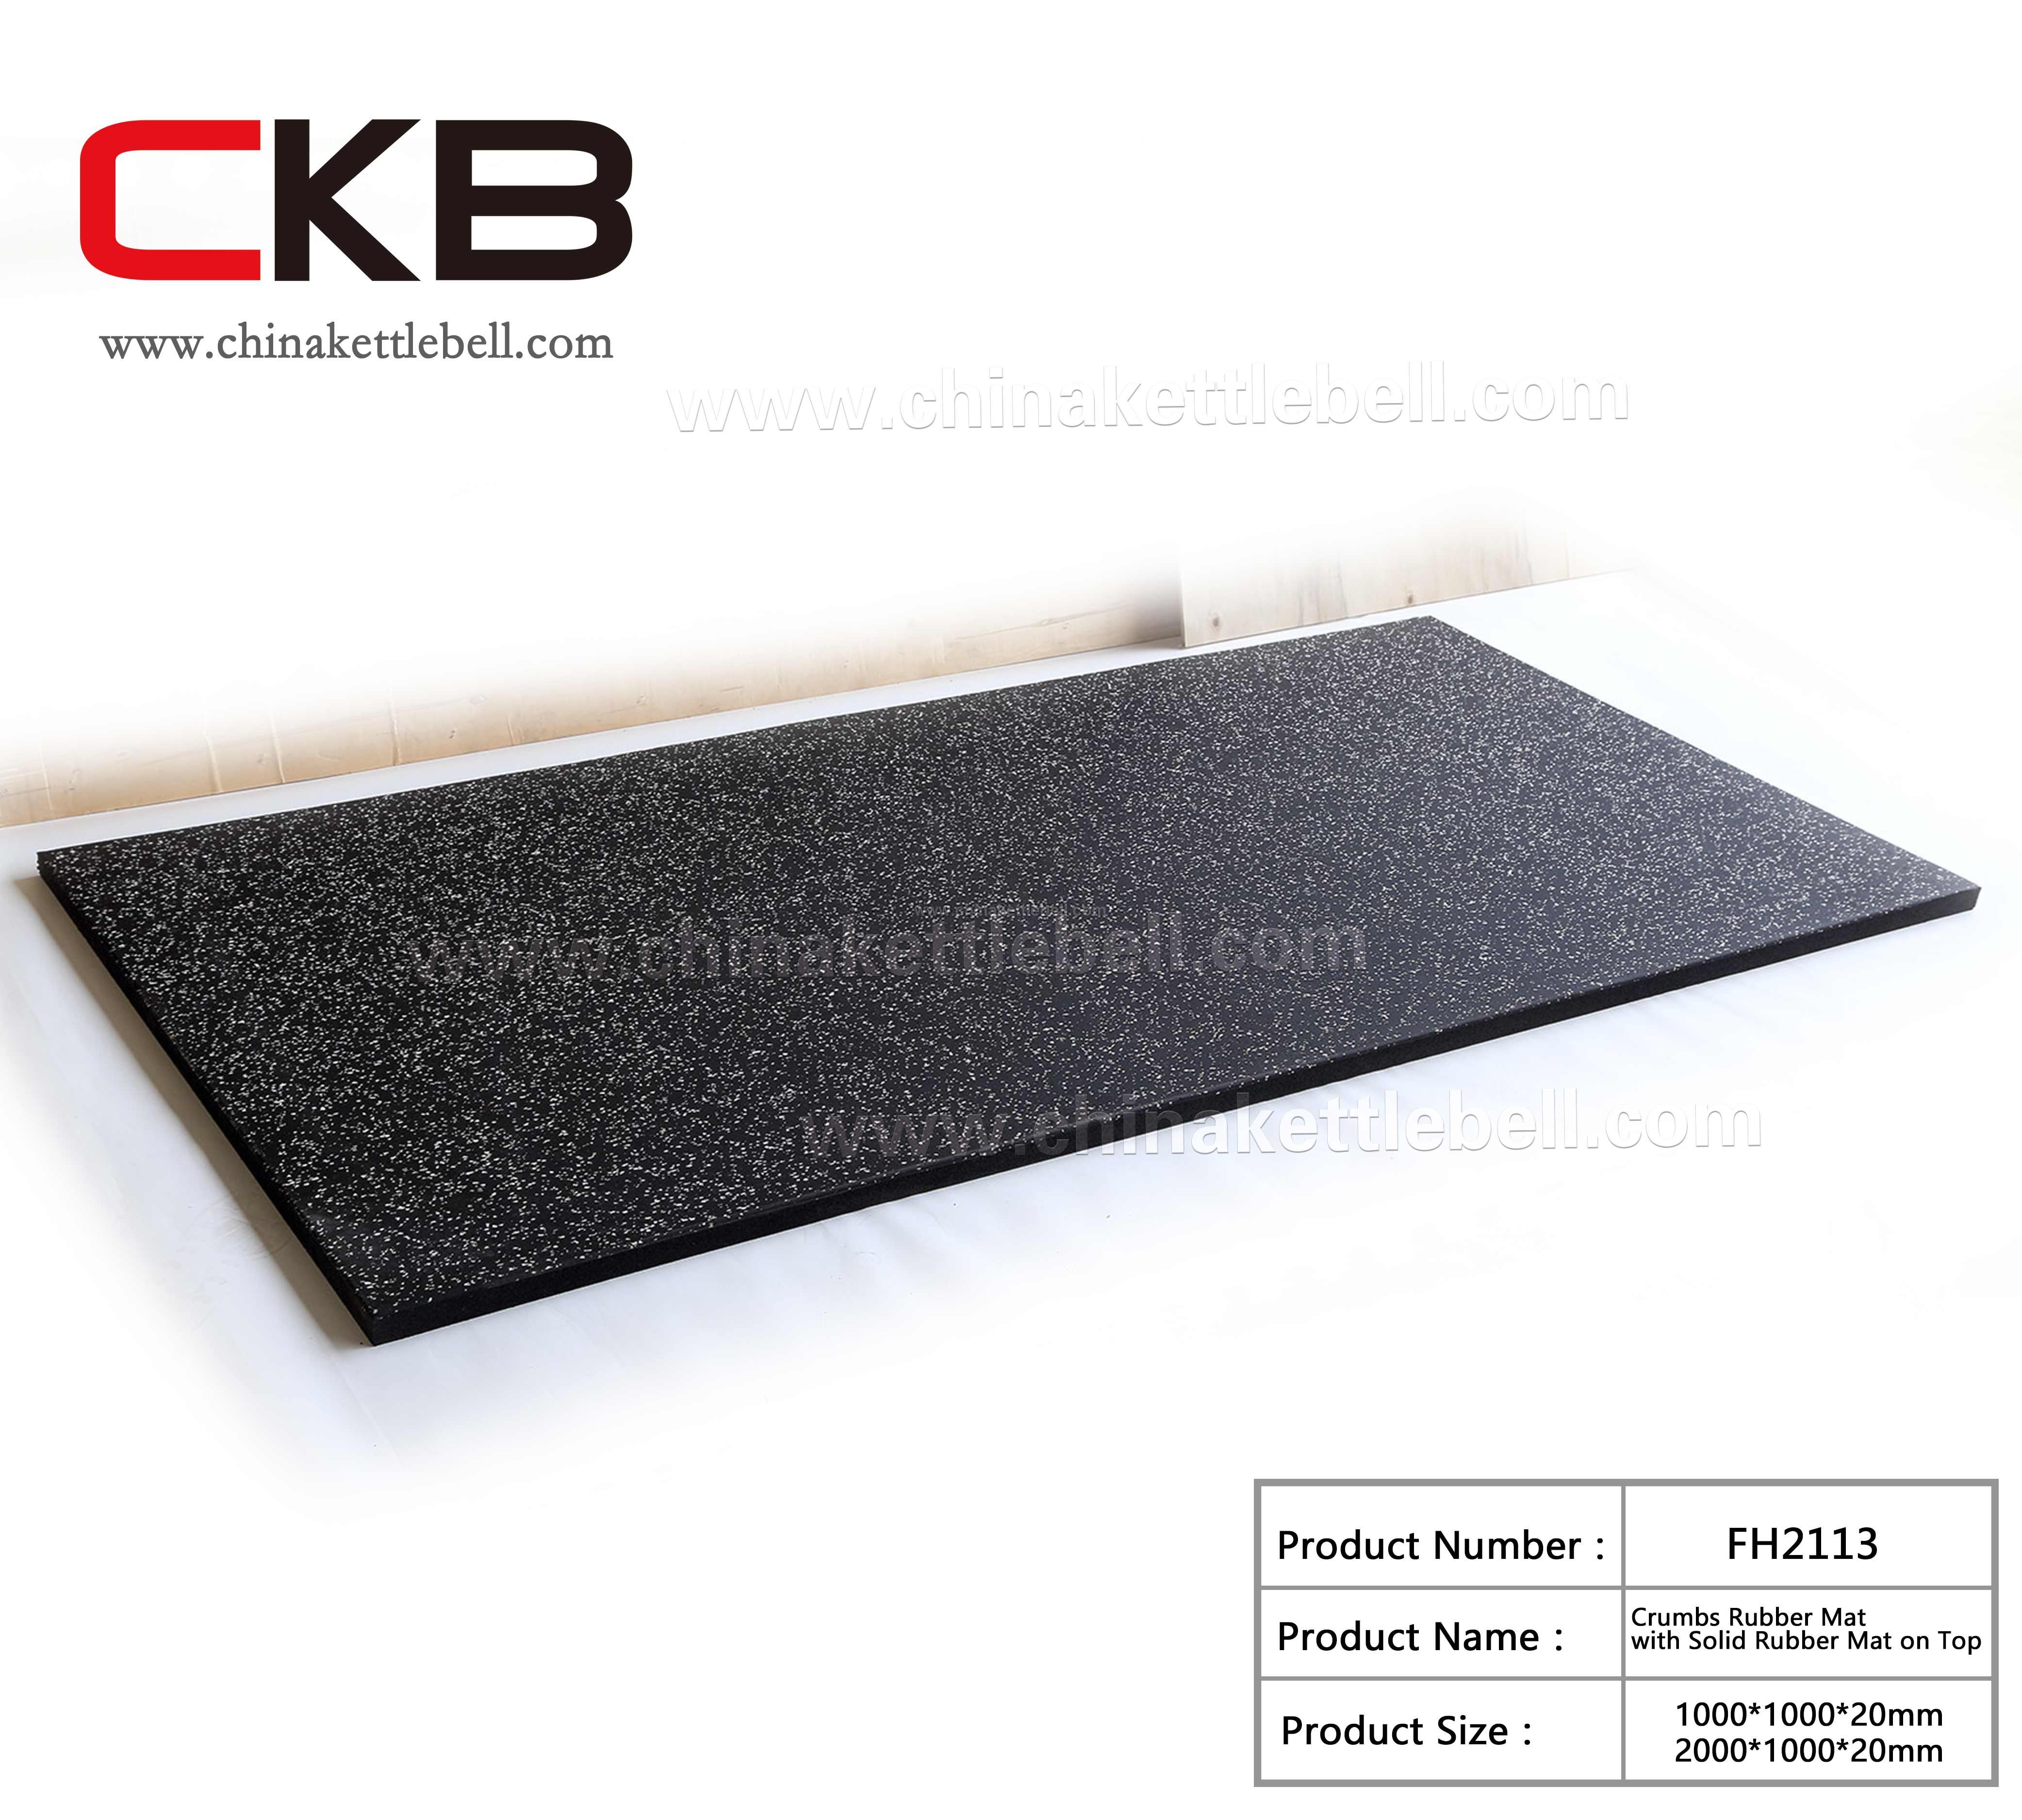 Crumbs Rubber Mat with Solid Rubber Mat on Top